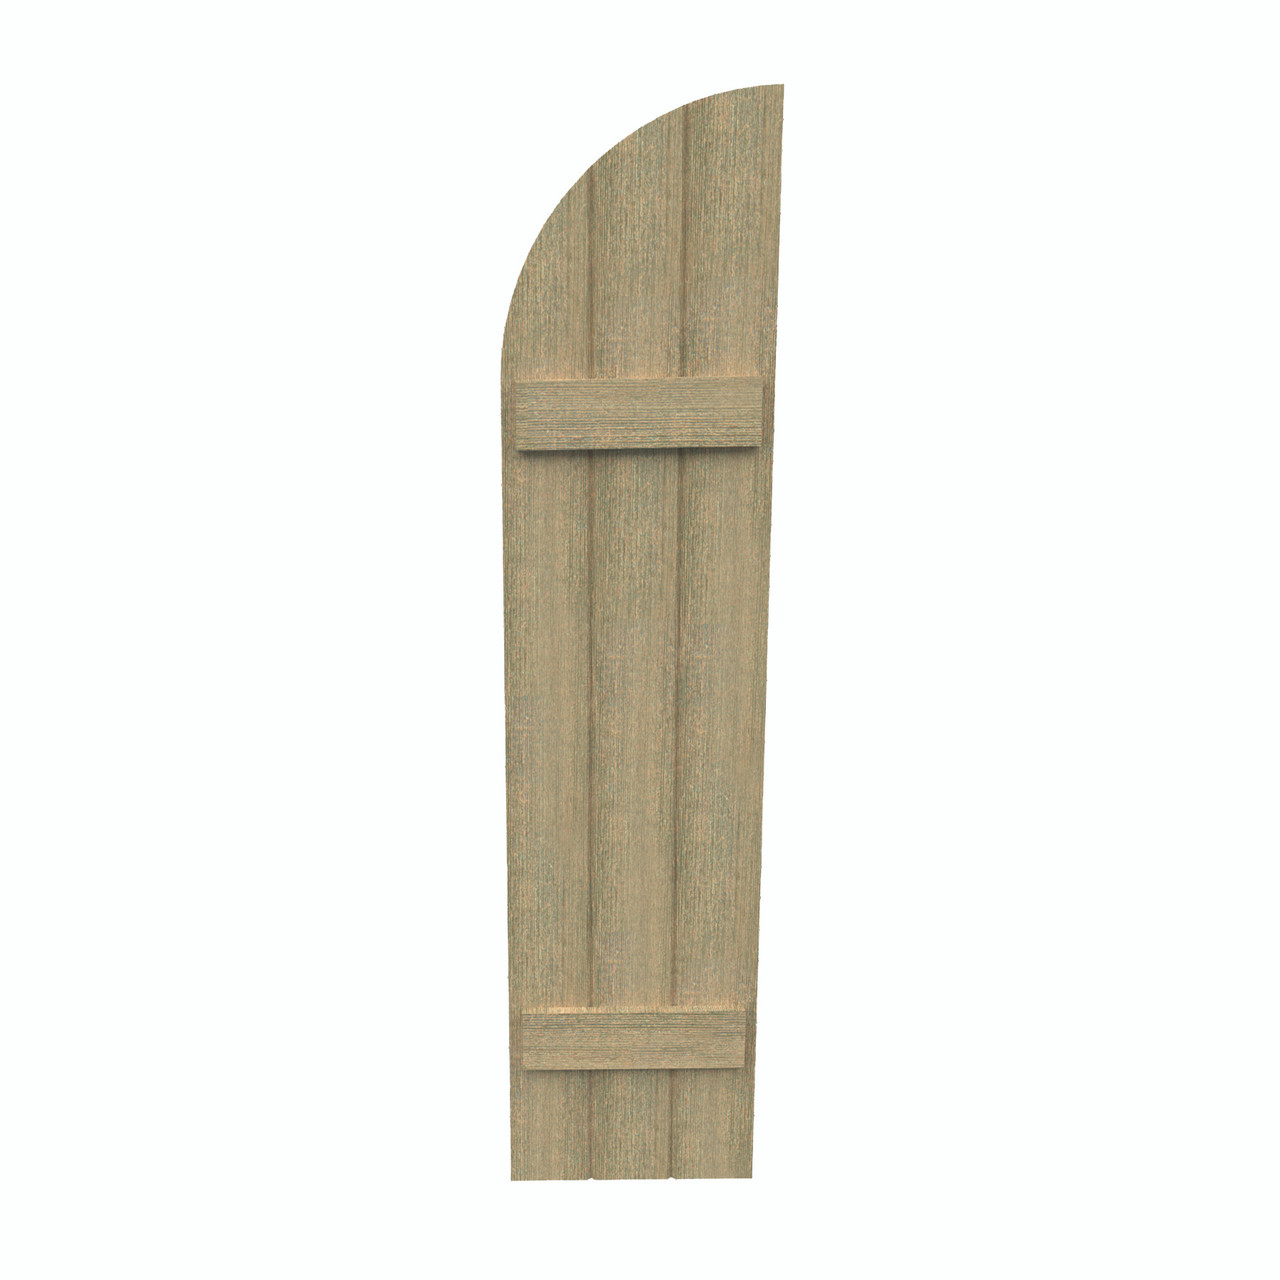 14 inch by 37 inch Quarter Round Shutter with 3-Boards